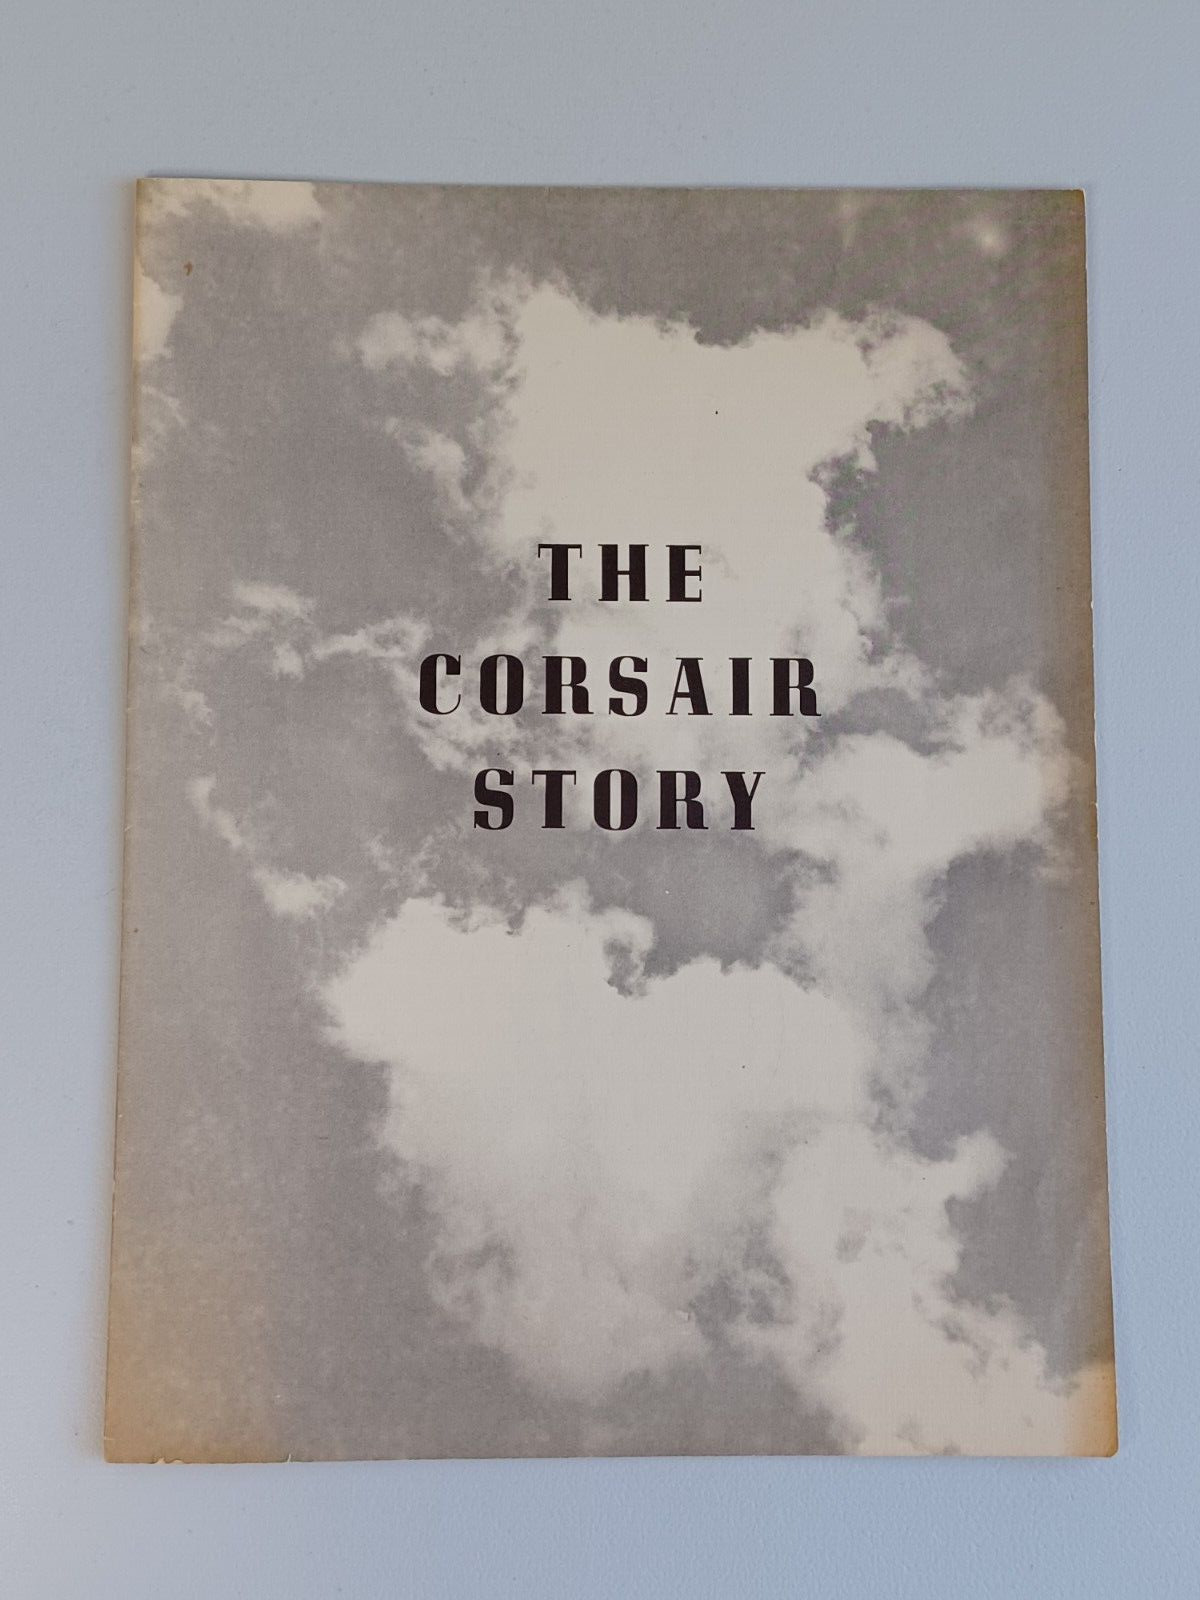 Vintage Booklet THE CORSAIR STORY (Chance Vought Aircraft, 1953) Preowned